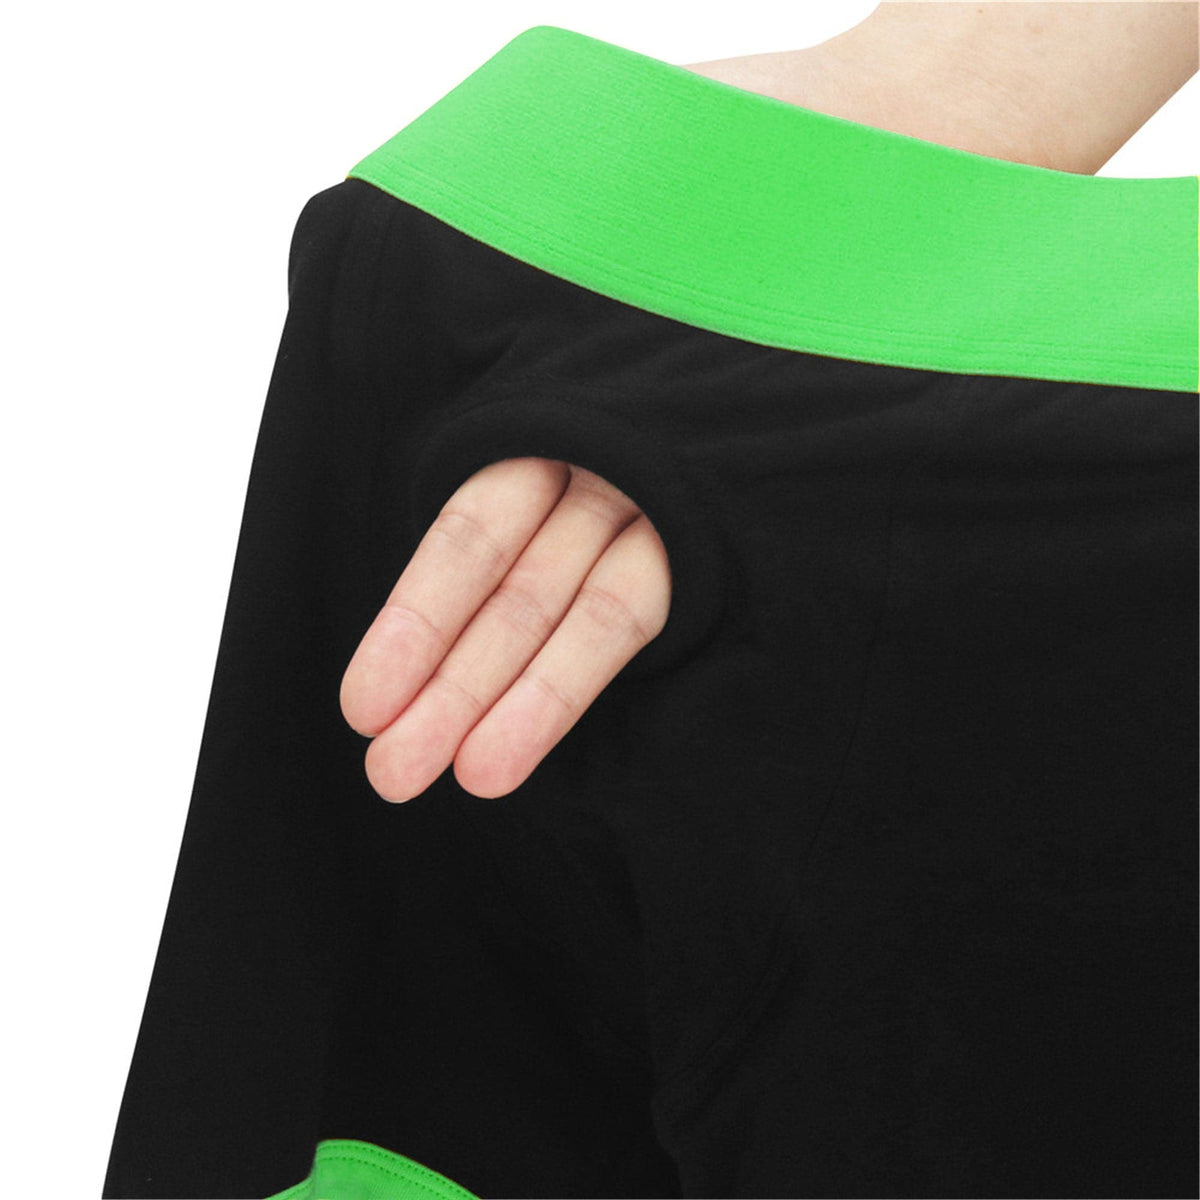 get lucky strap on boxer shorts xlarge xxlarge black green